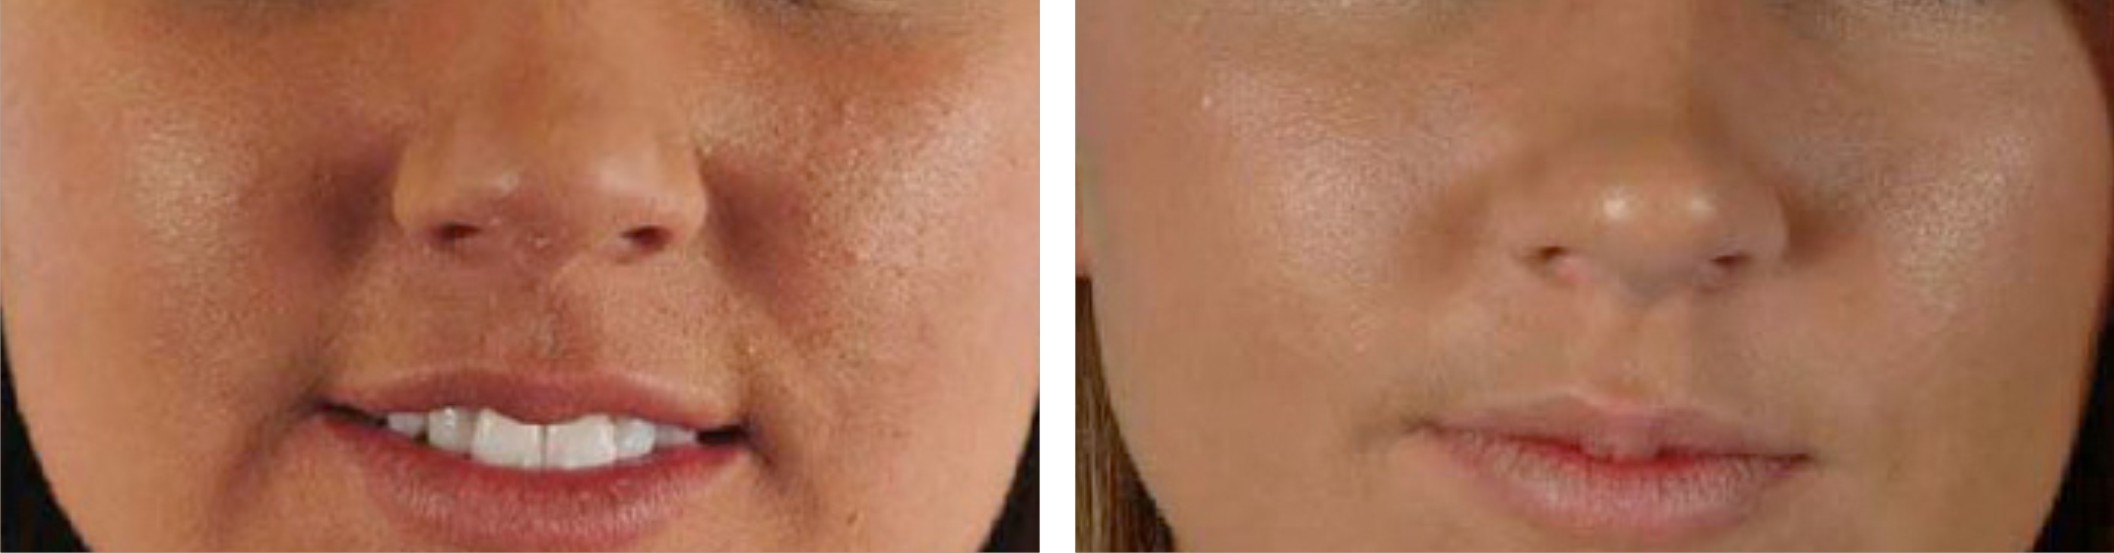 Microdermabrasion Image One